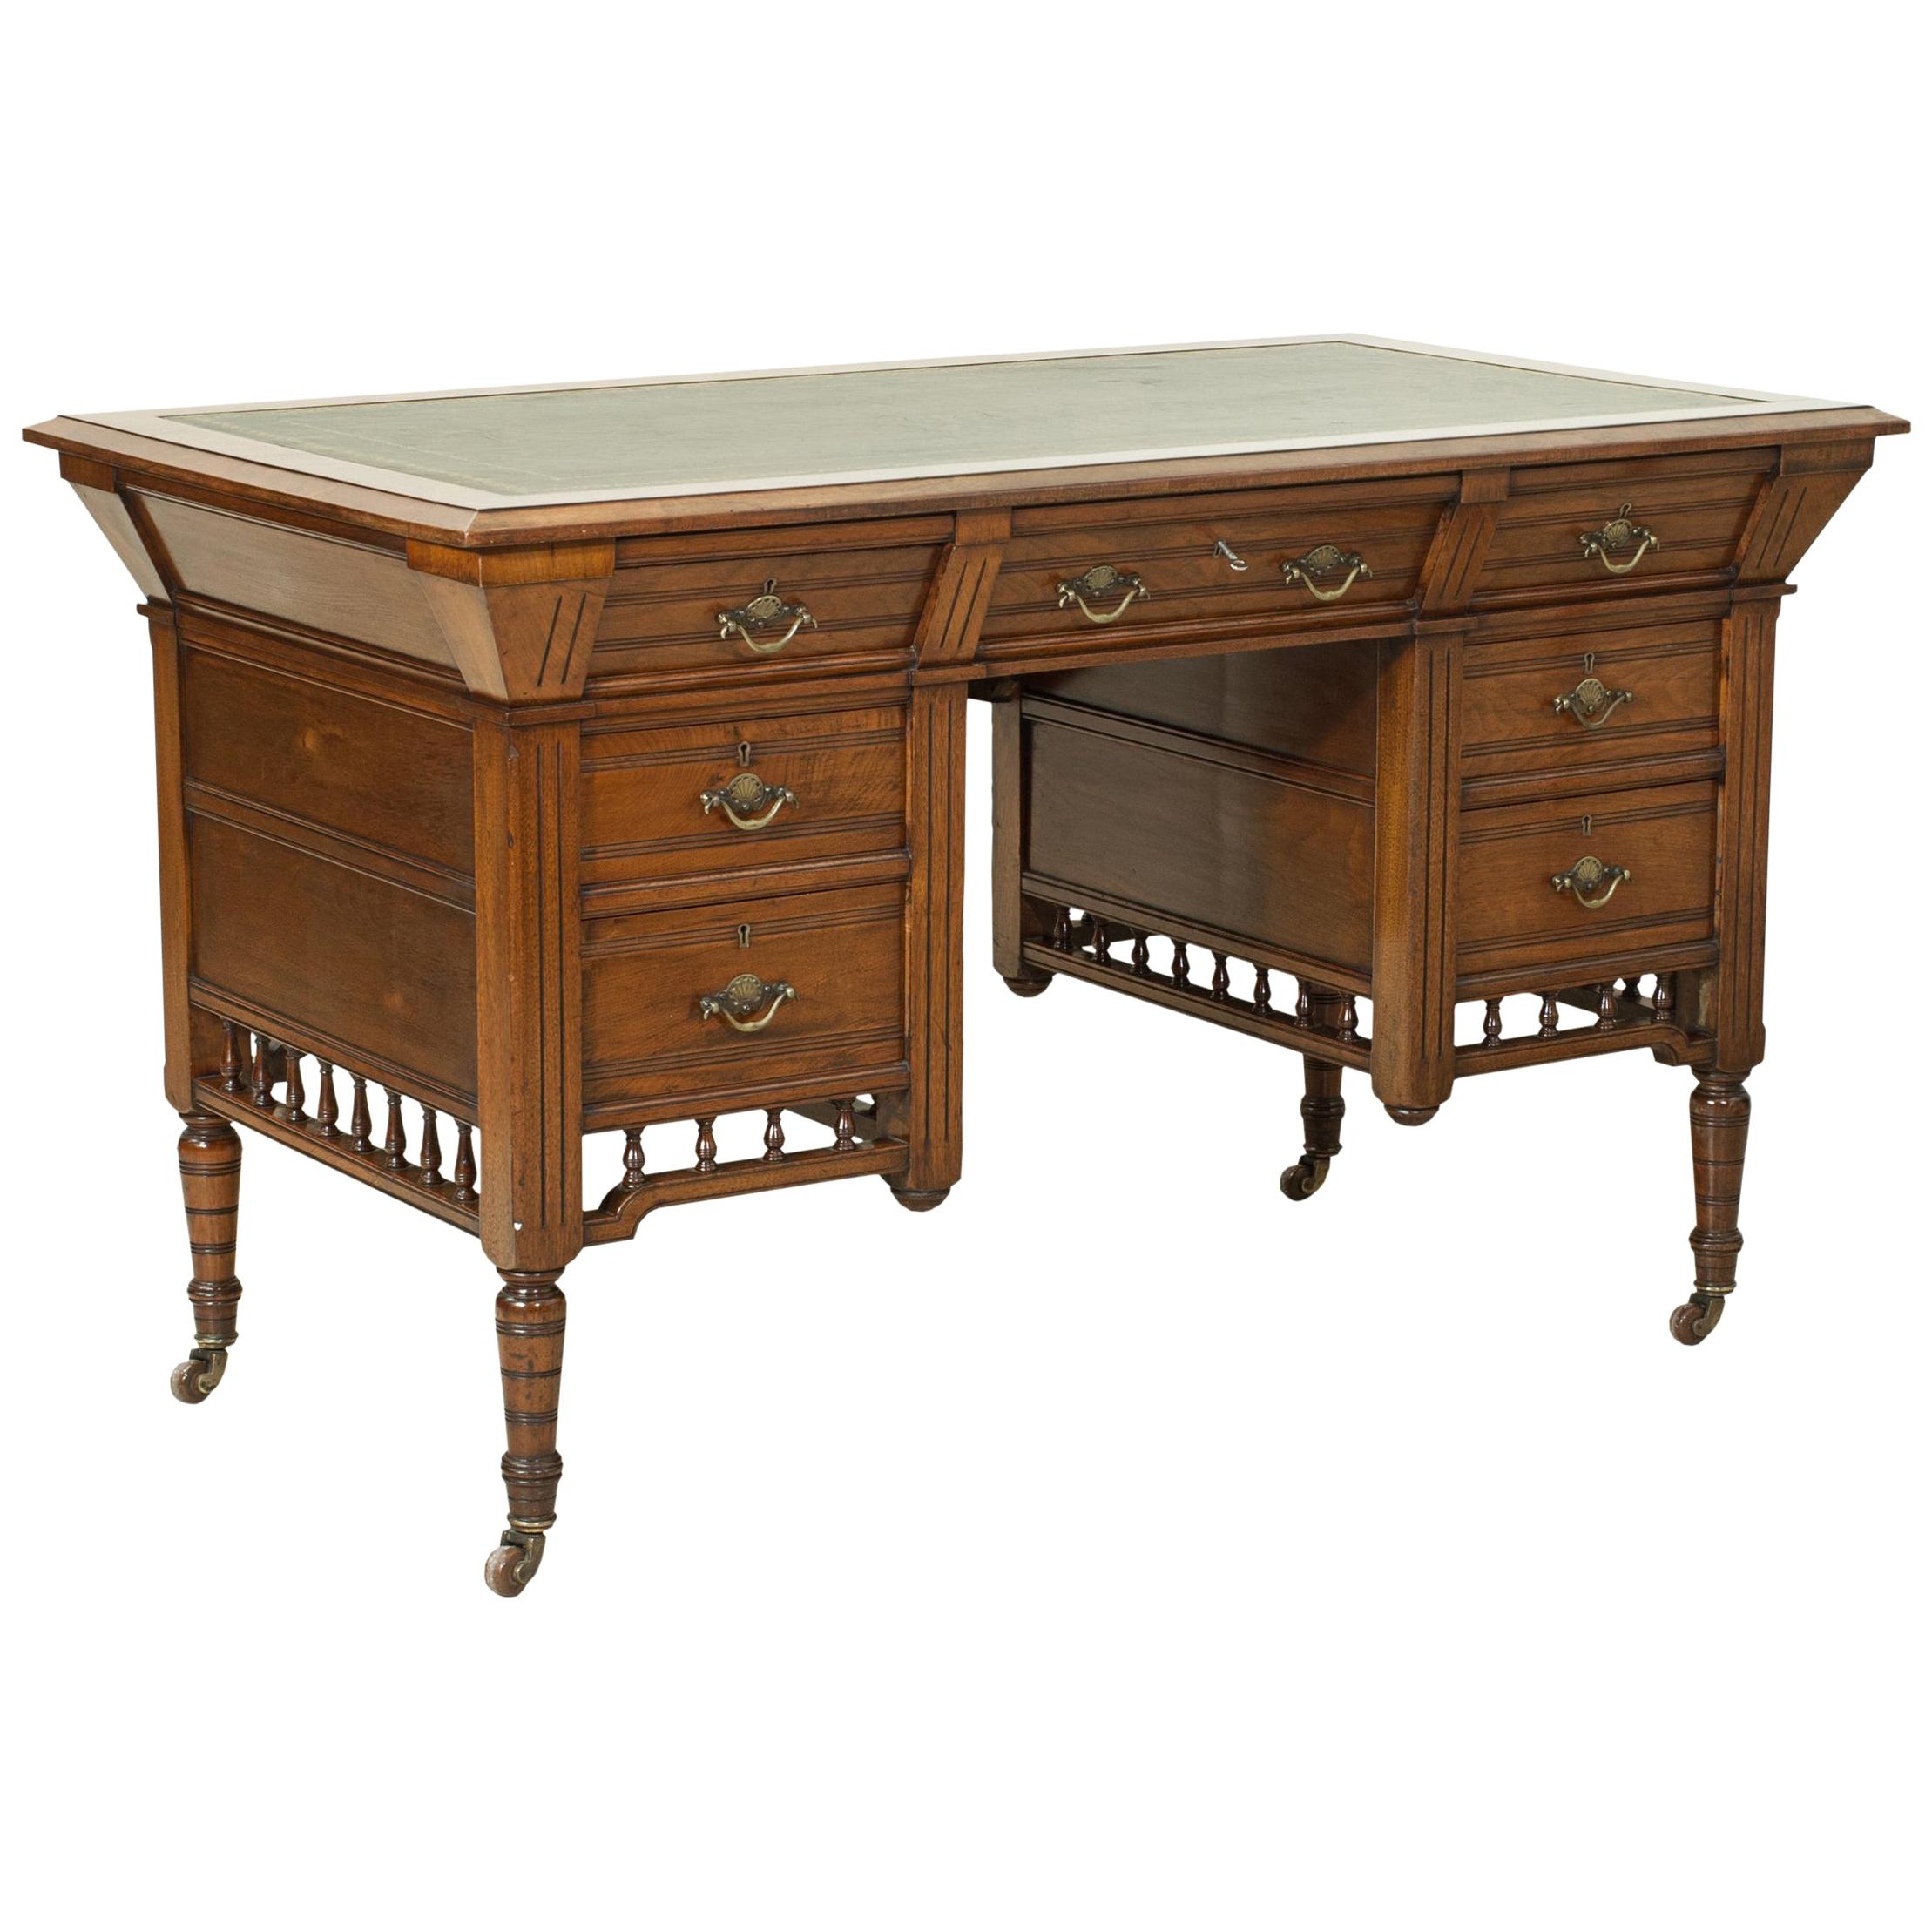 Antique, Small Ladies Walnut Partners Desk by Lovell & COX